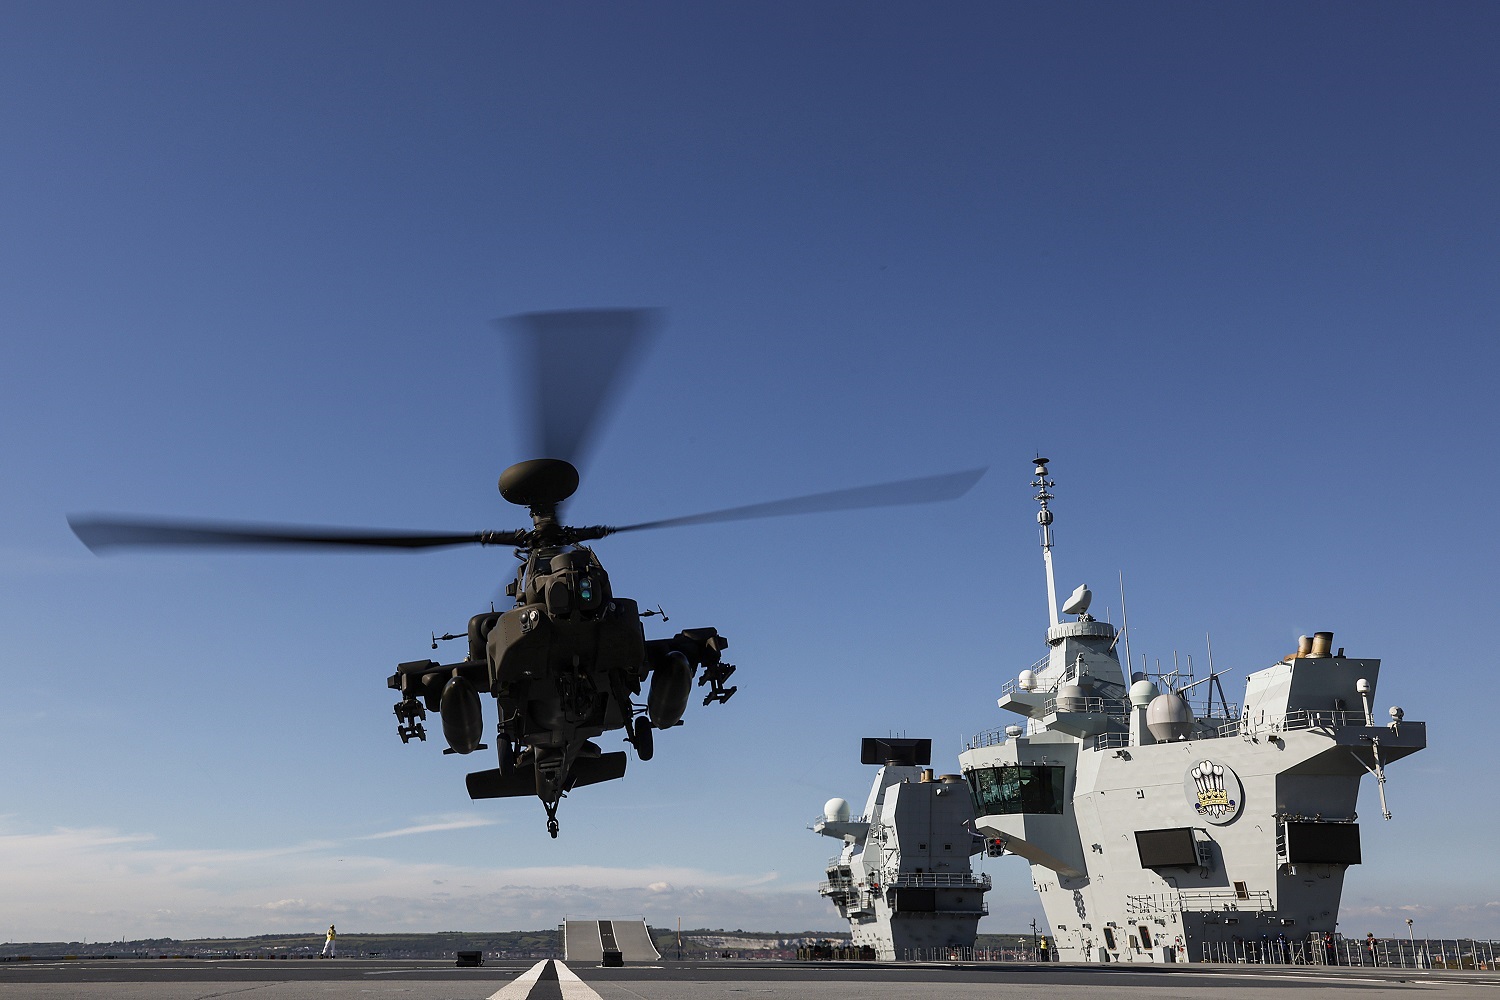 British Army Apache Attack Helicopters Add Striking Power to Royal Navy HMS Prince of Wales